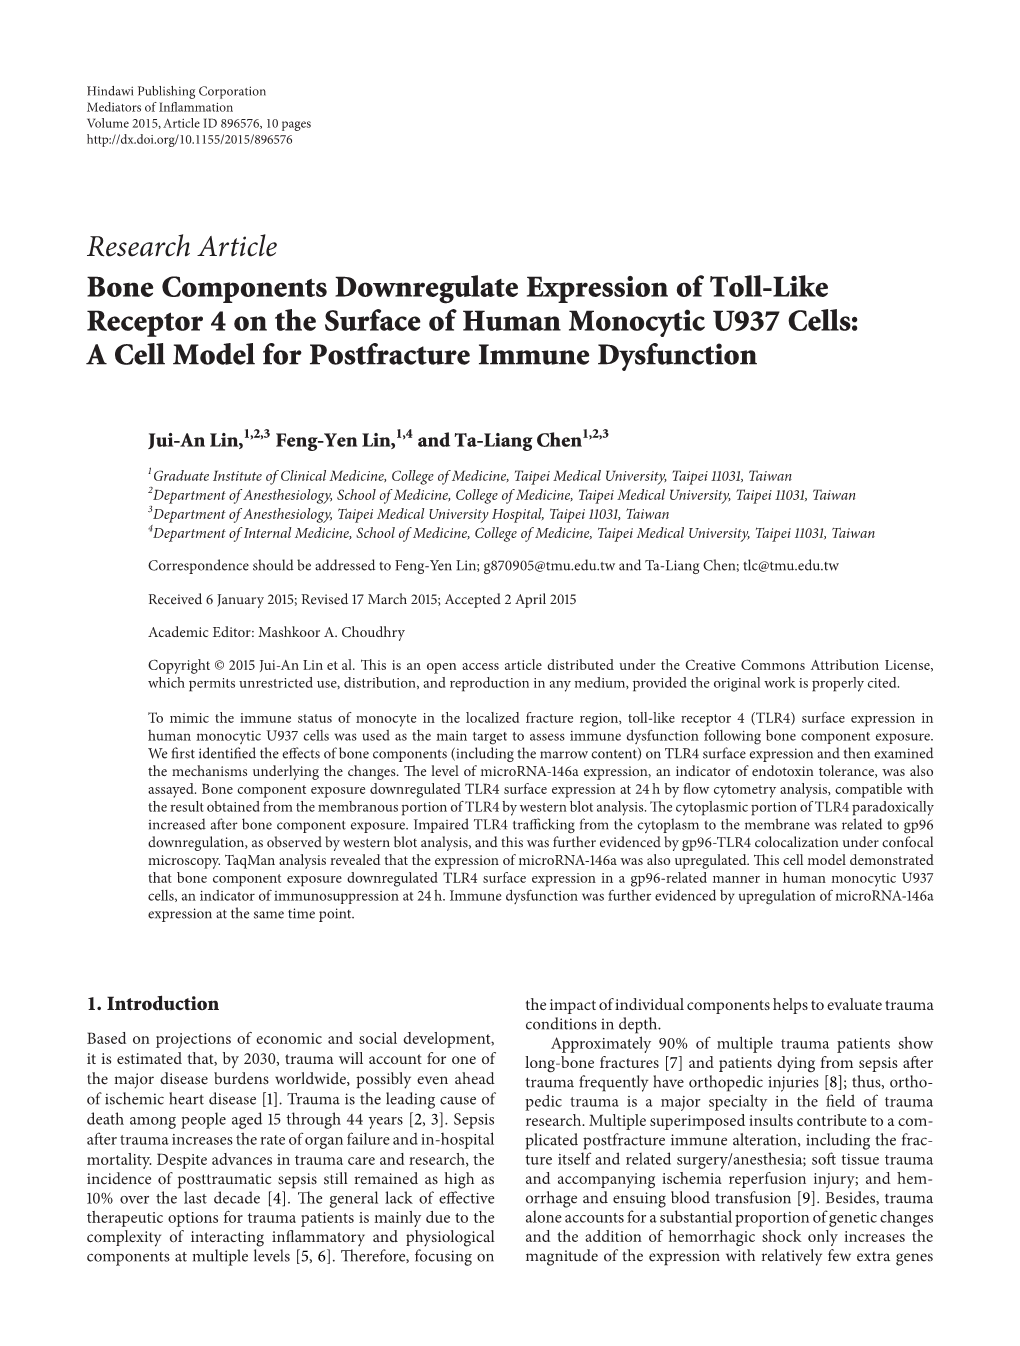 Bone Components Downregulate Expression of Toll-Like Receptor 4 on the Surface of Human Monocytic U937 Cells: a Cell Model for Postfracture Immune Dysfunction